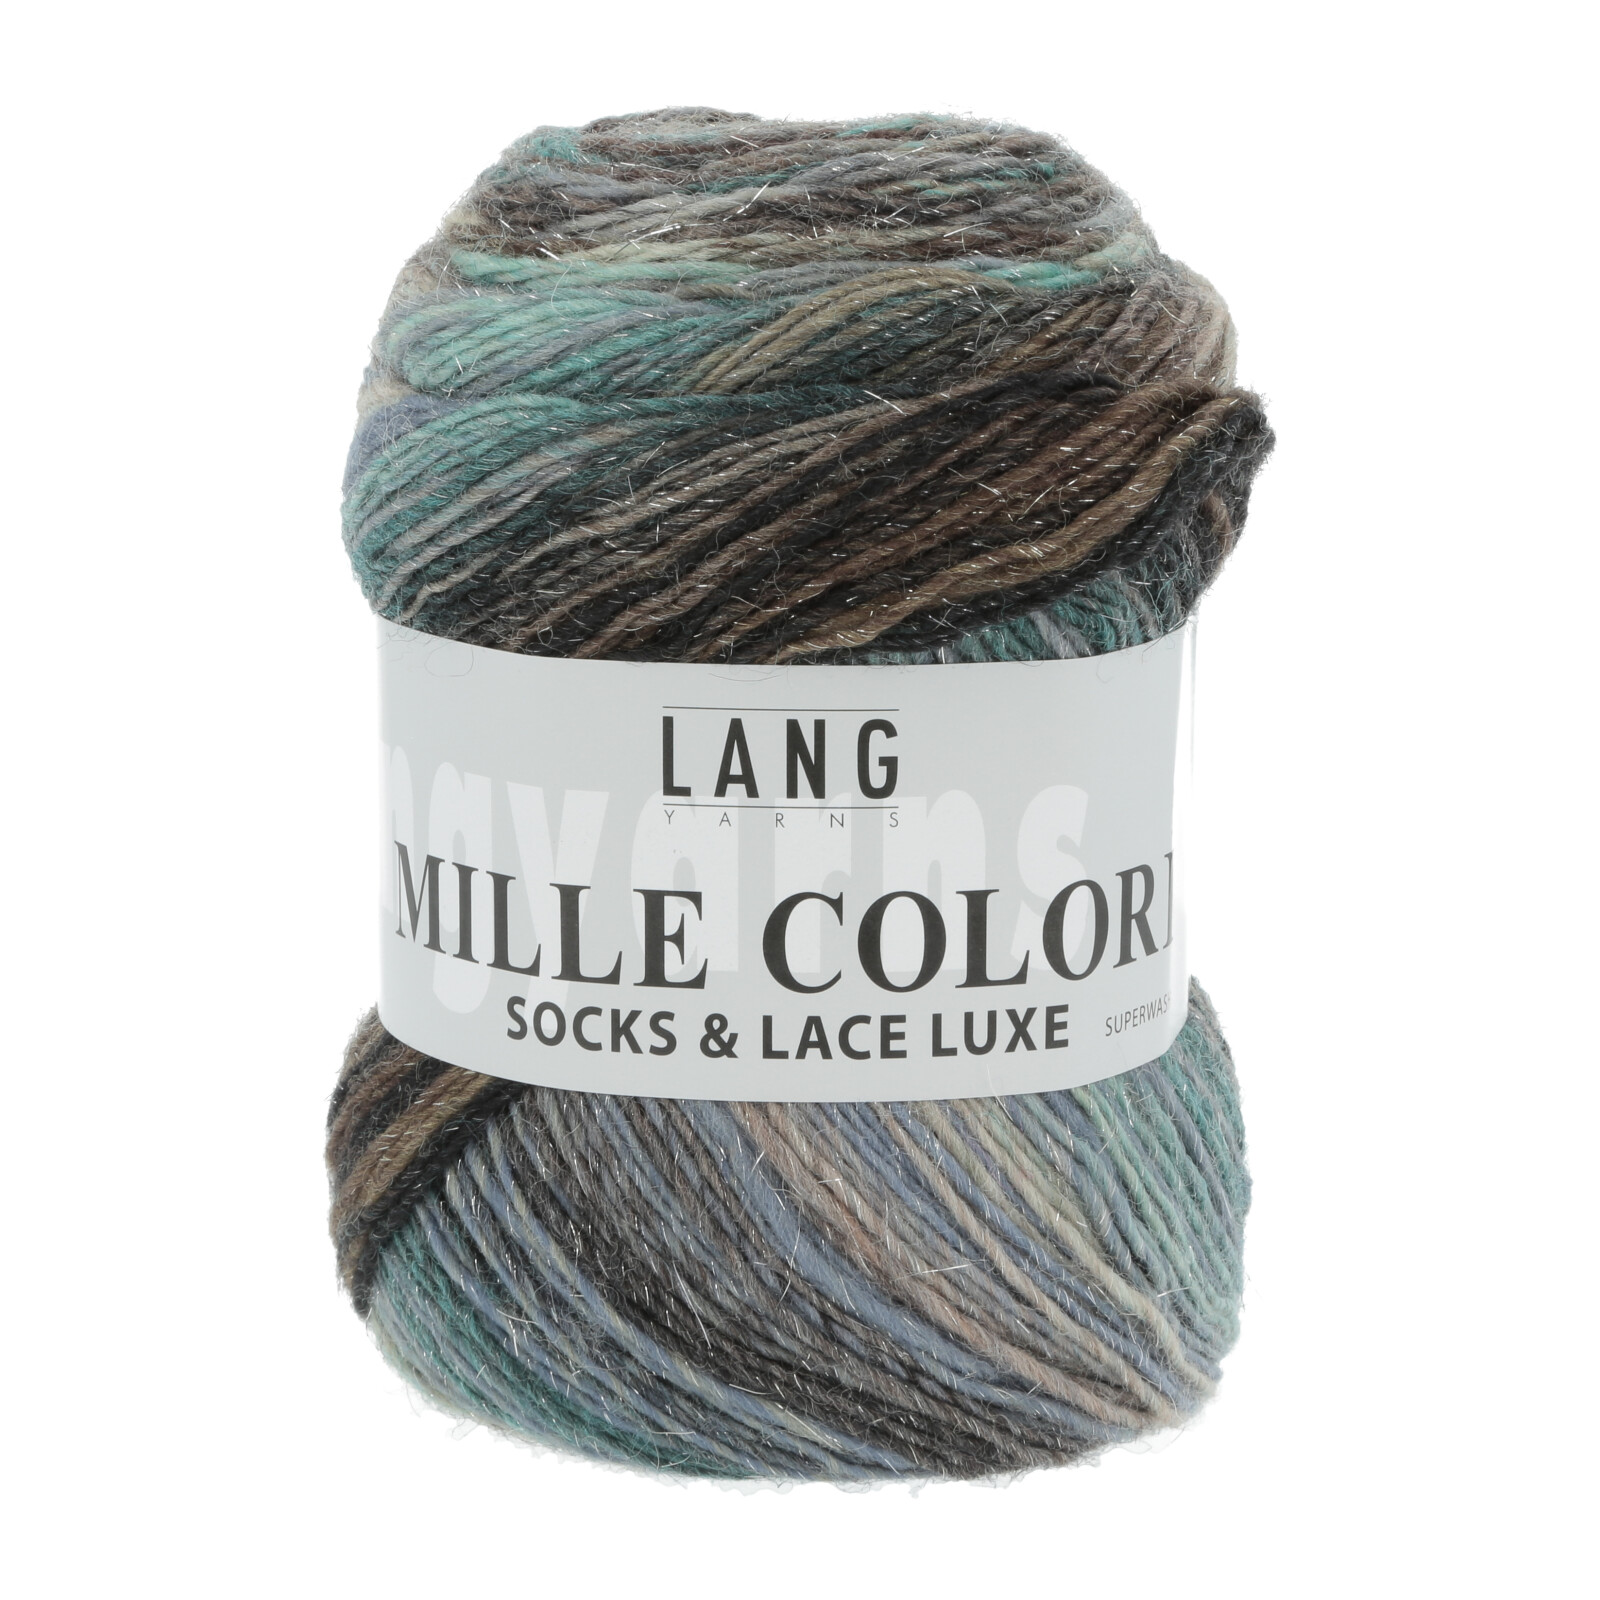 LANG Mille Colori Socks & Lace Luxe